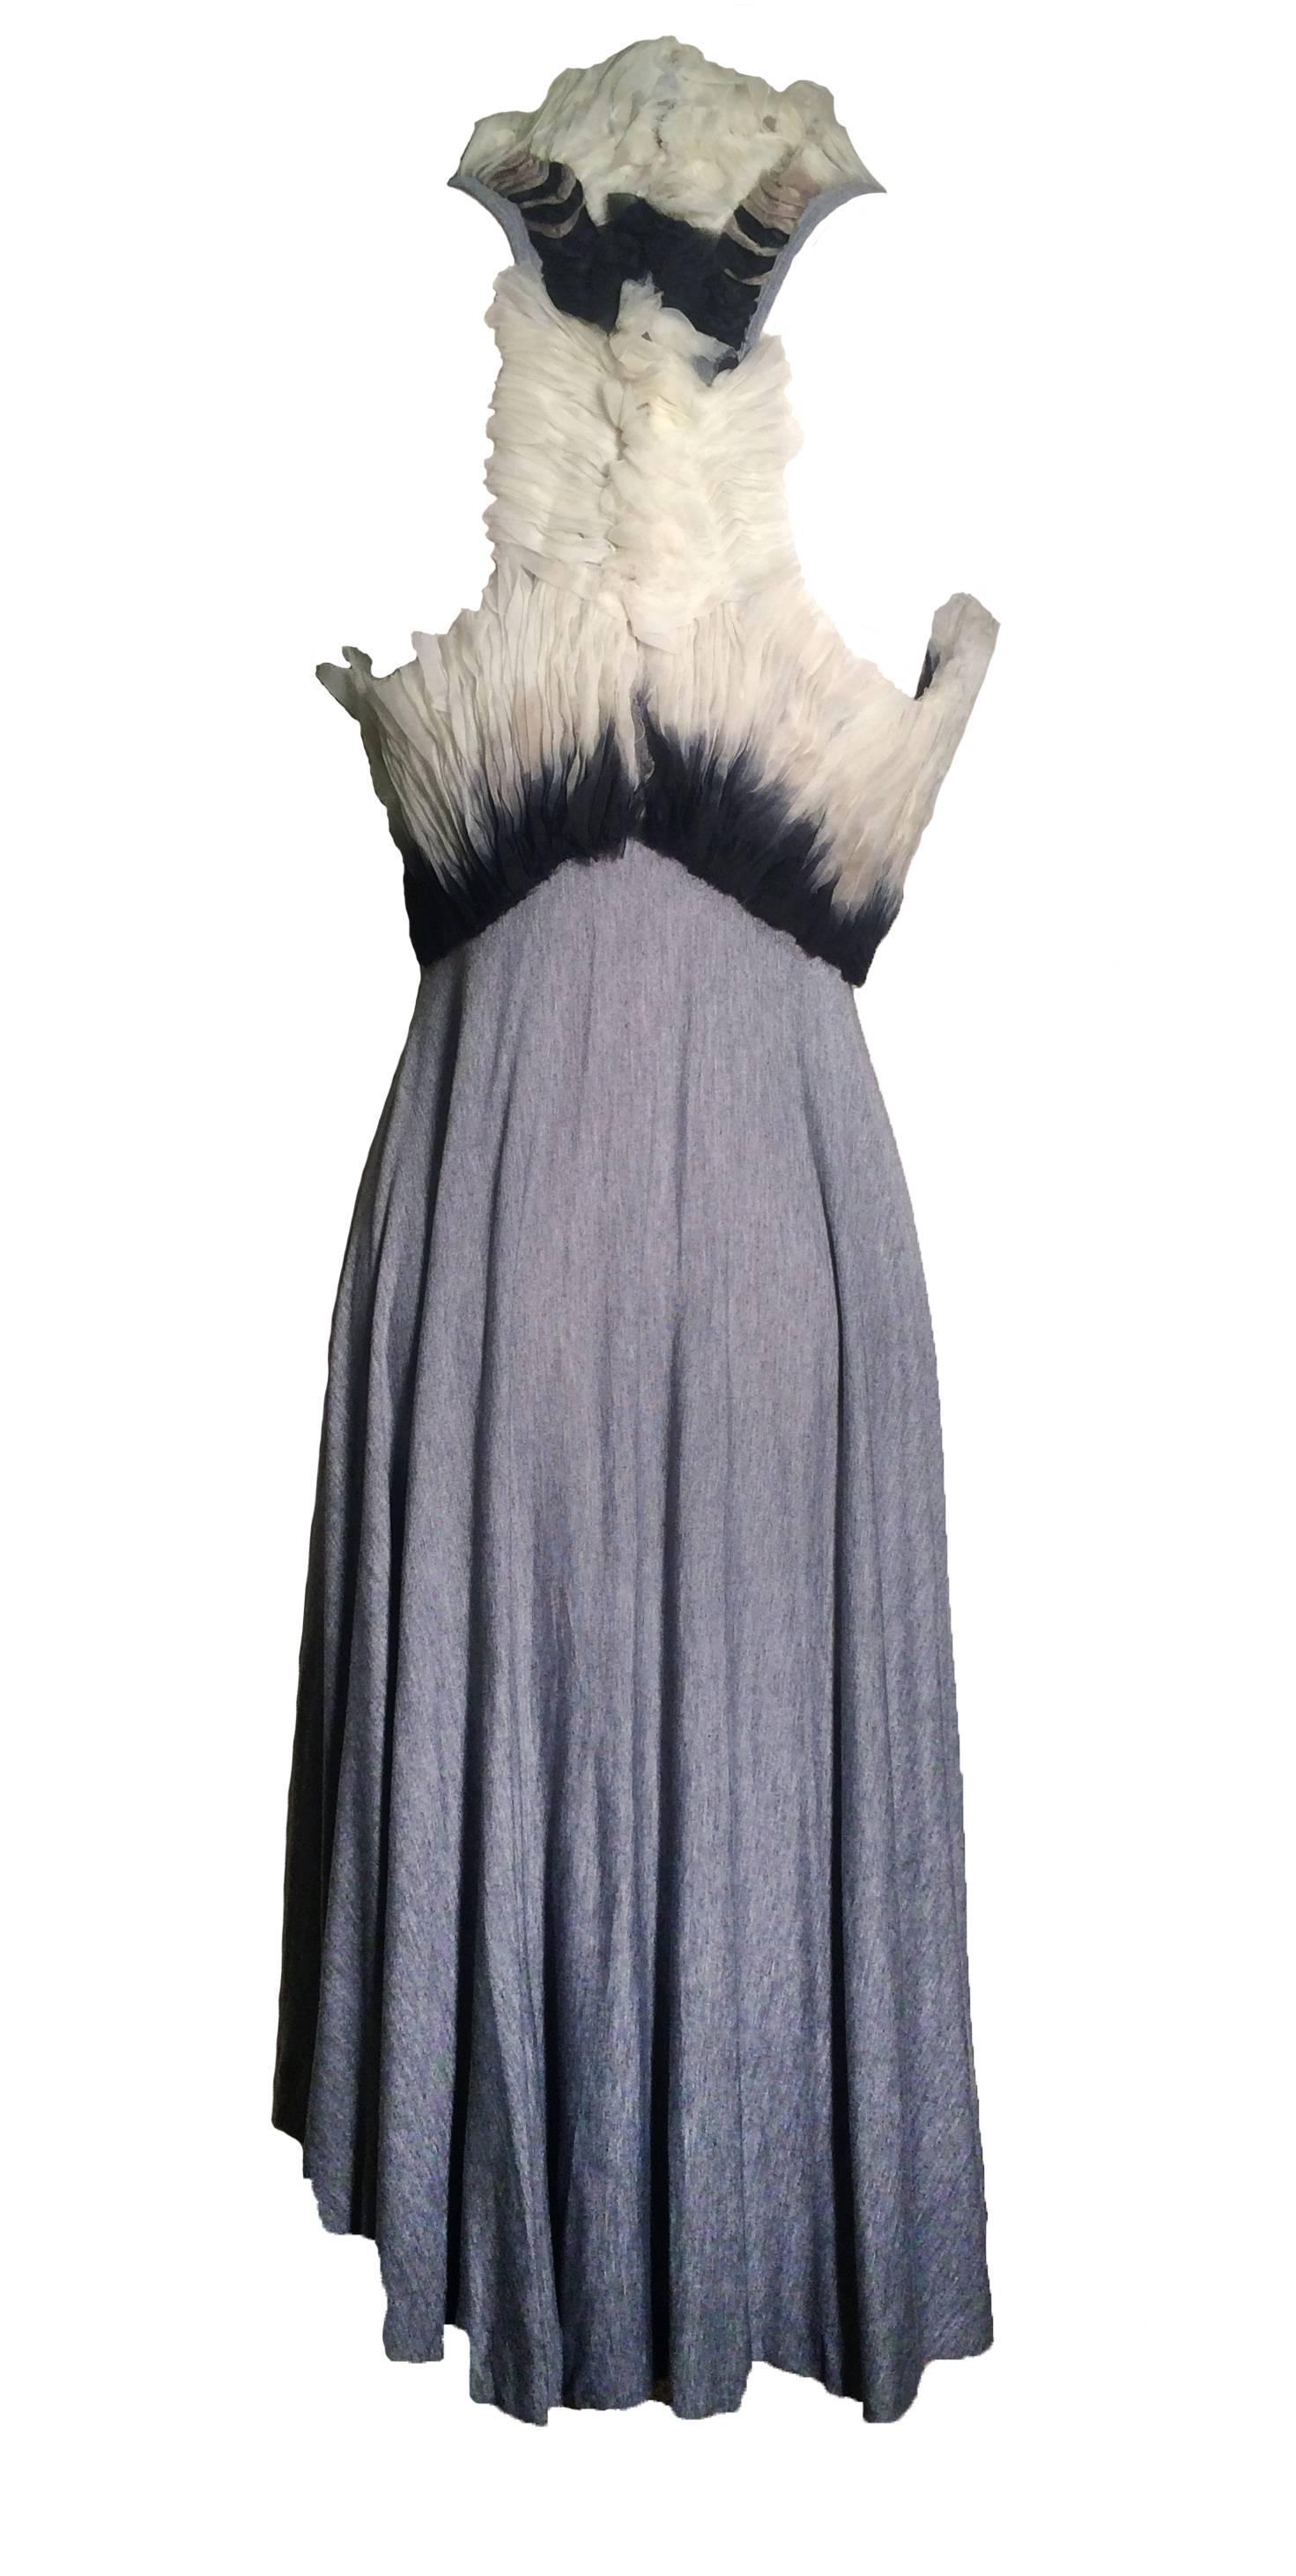 Super soft grey rayon jersey dress with an empire bodice decorated in pleated, raw edged ombre organdy. Racer back with swingy circle skirt. 

Assymetrical hem is longer in center front/back than on sides.

Back zip.

Made in India.